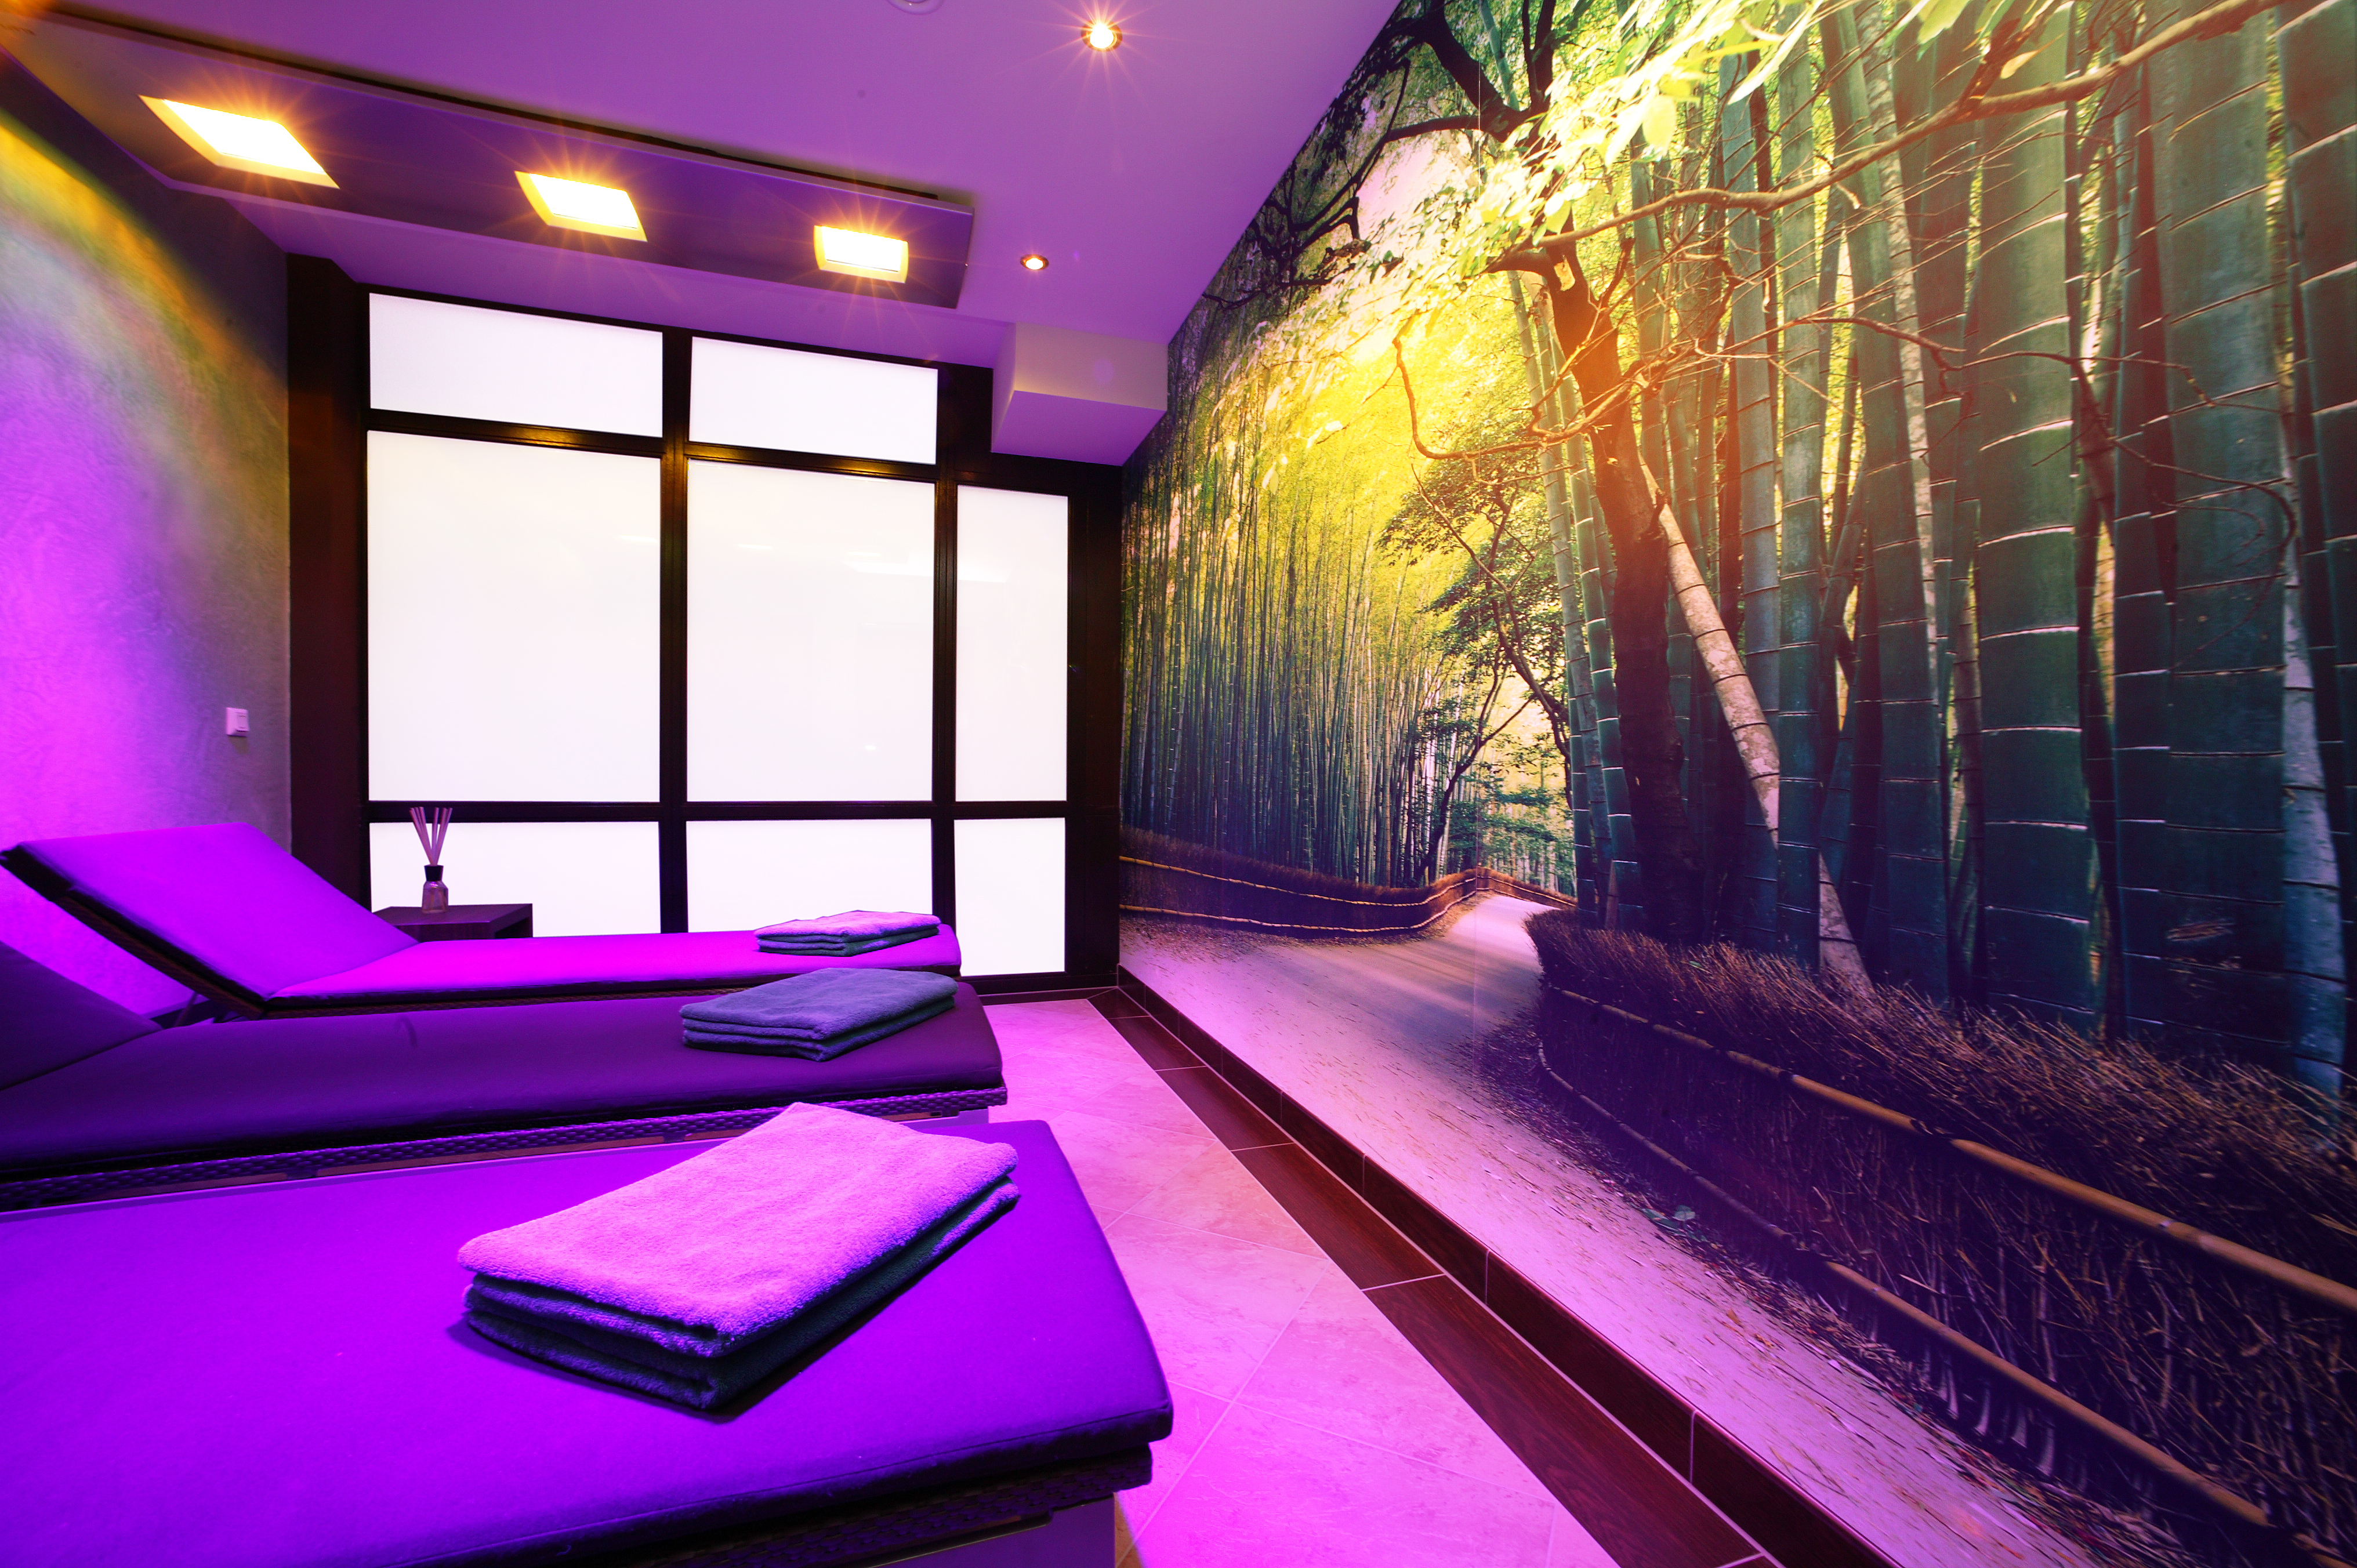 Klafs sun room in the wellness area with comfortable loungers and a view to a wall painting with a bamboo forest